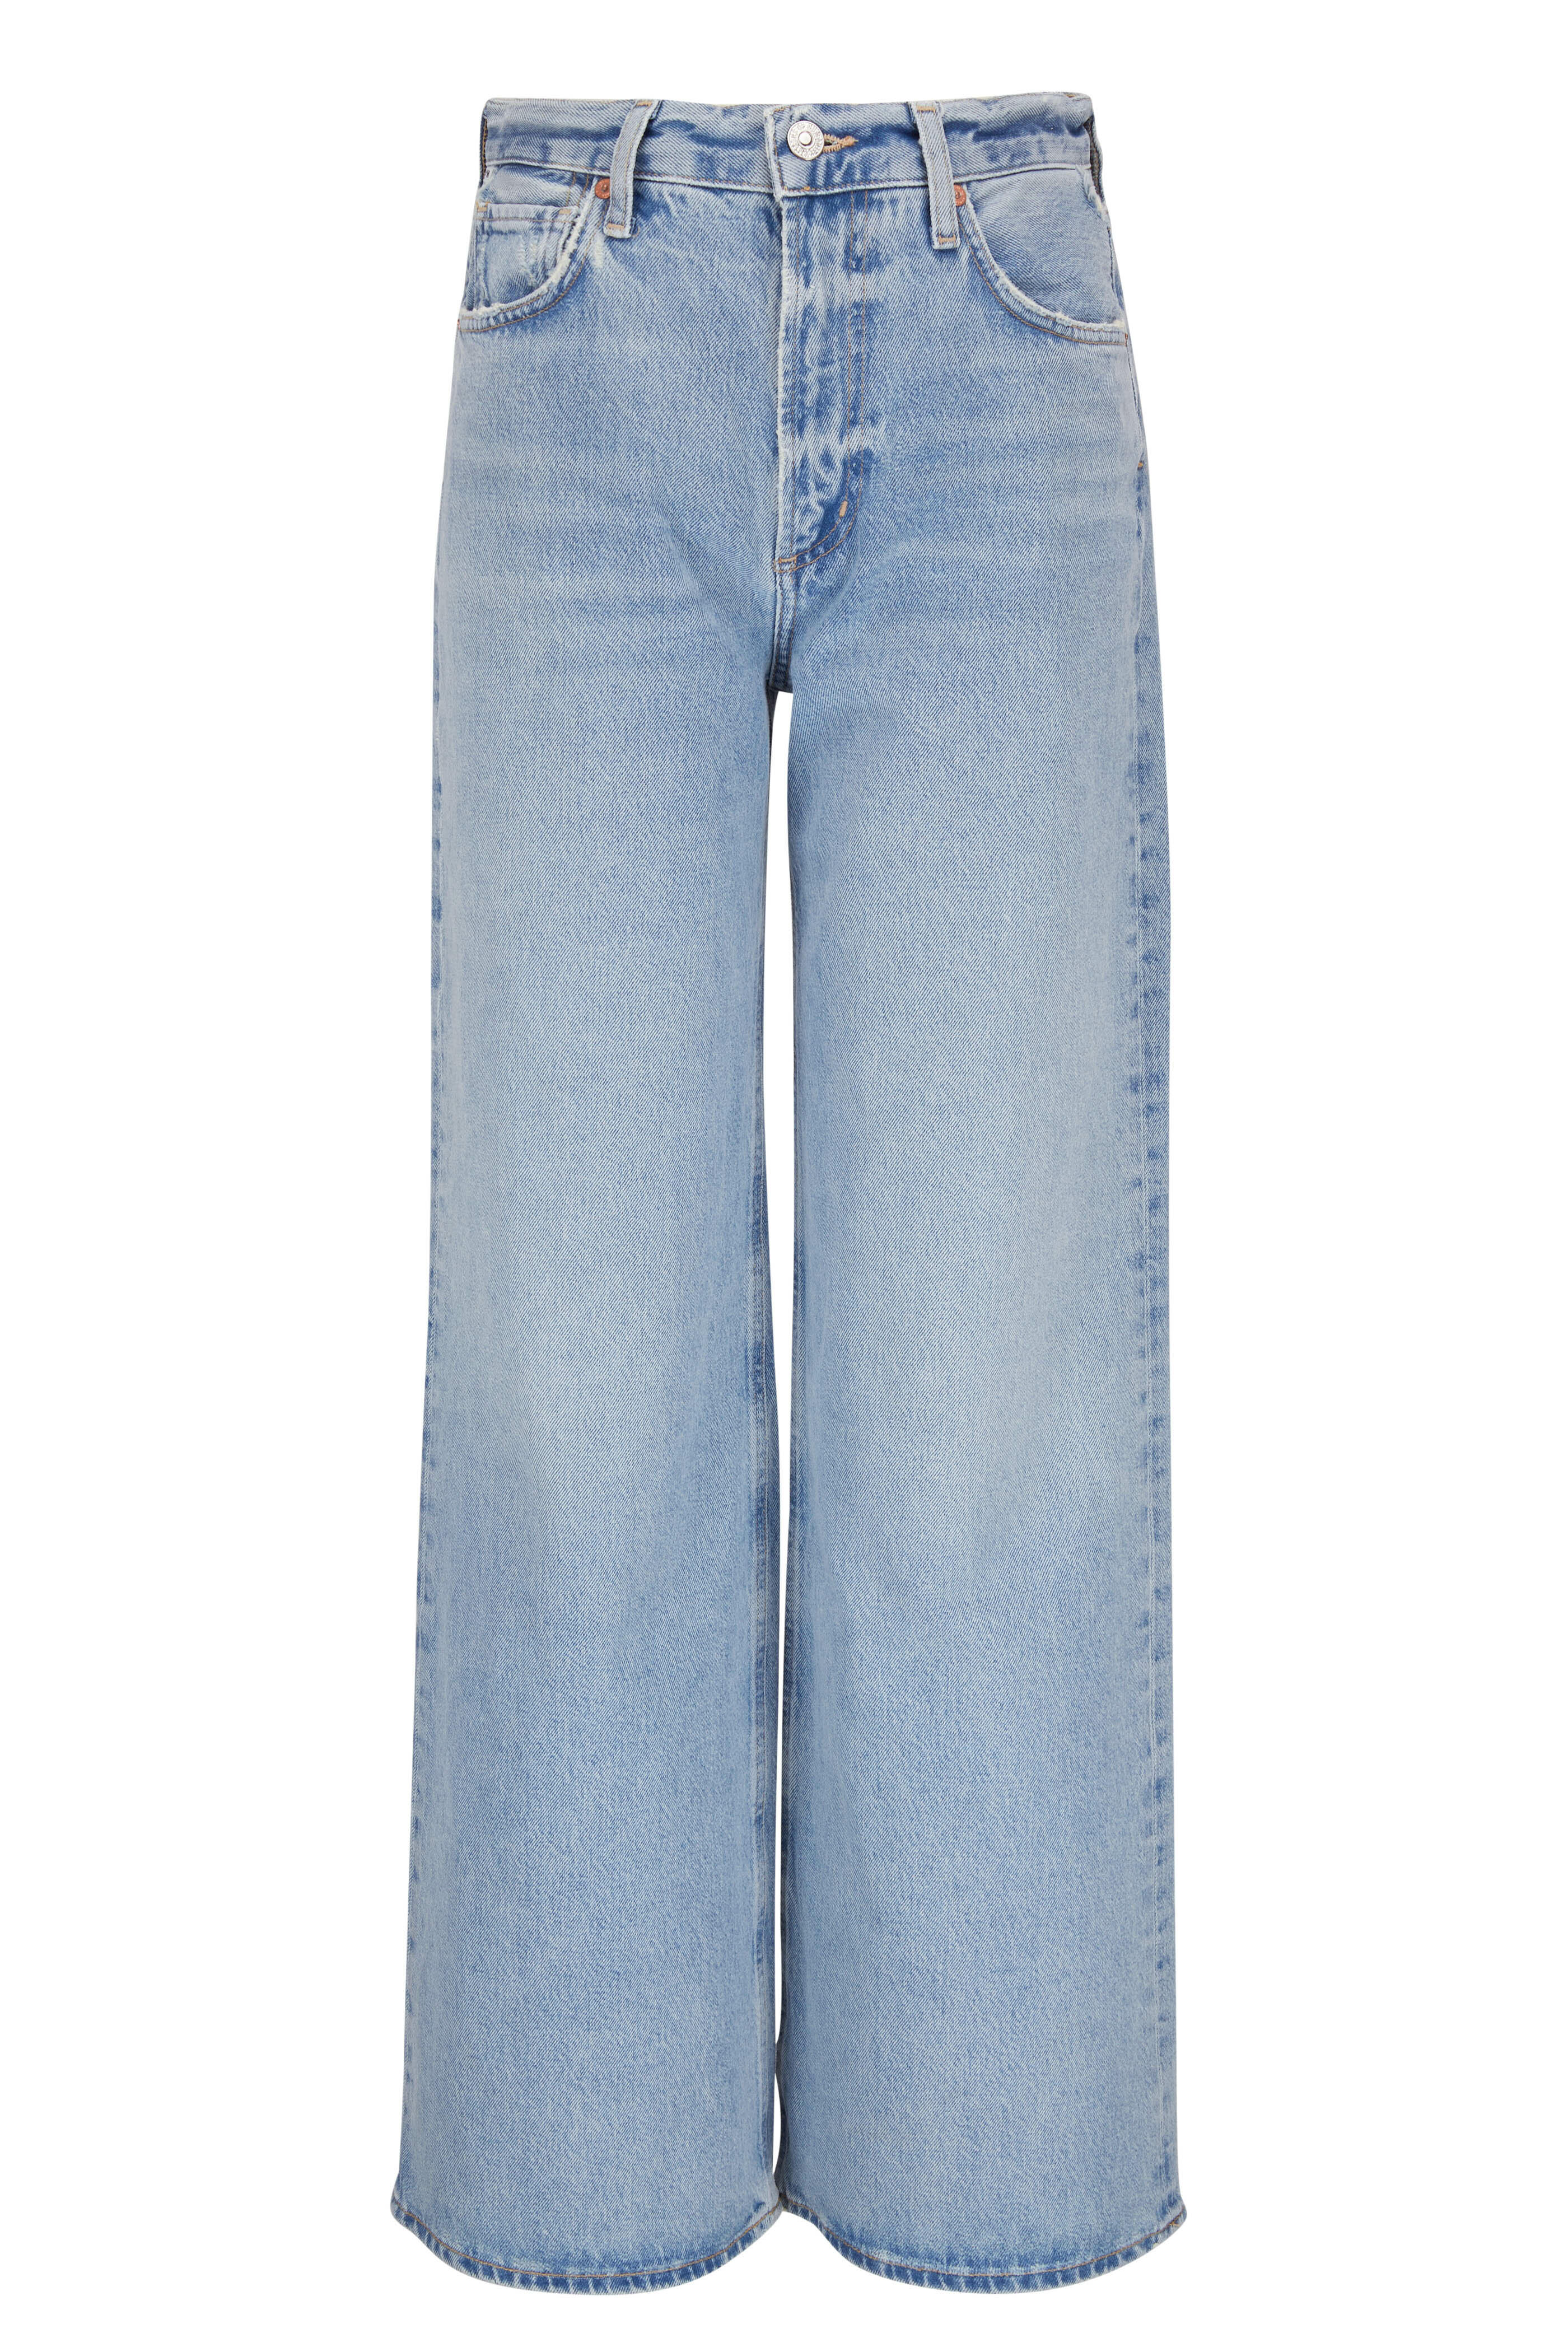 Citizens of Humanity - Paloma Baggy Daydream Blue Wide Leg Jean